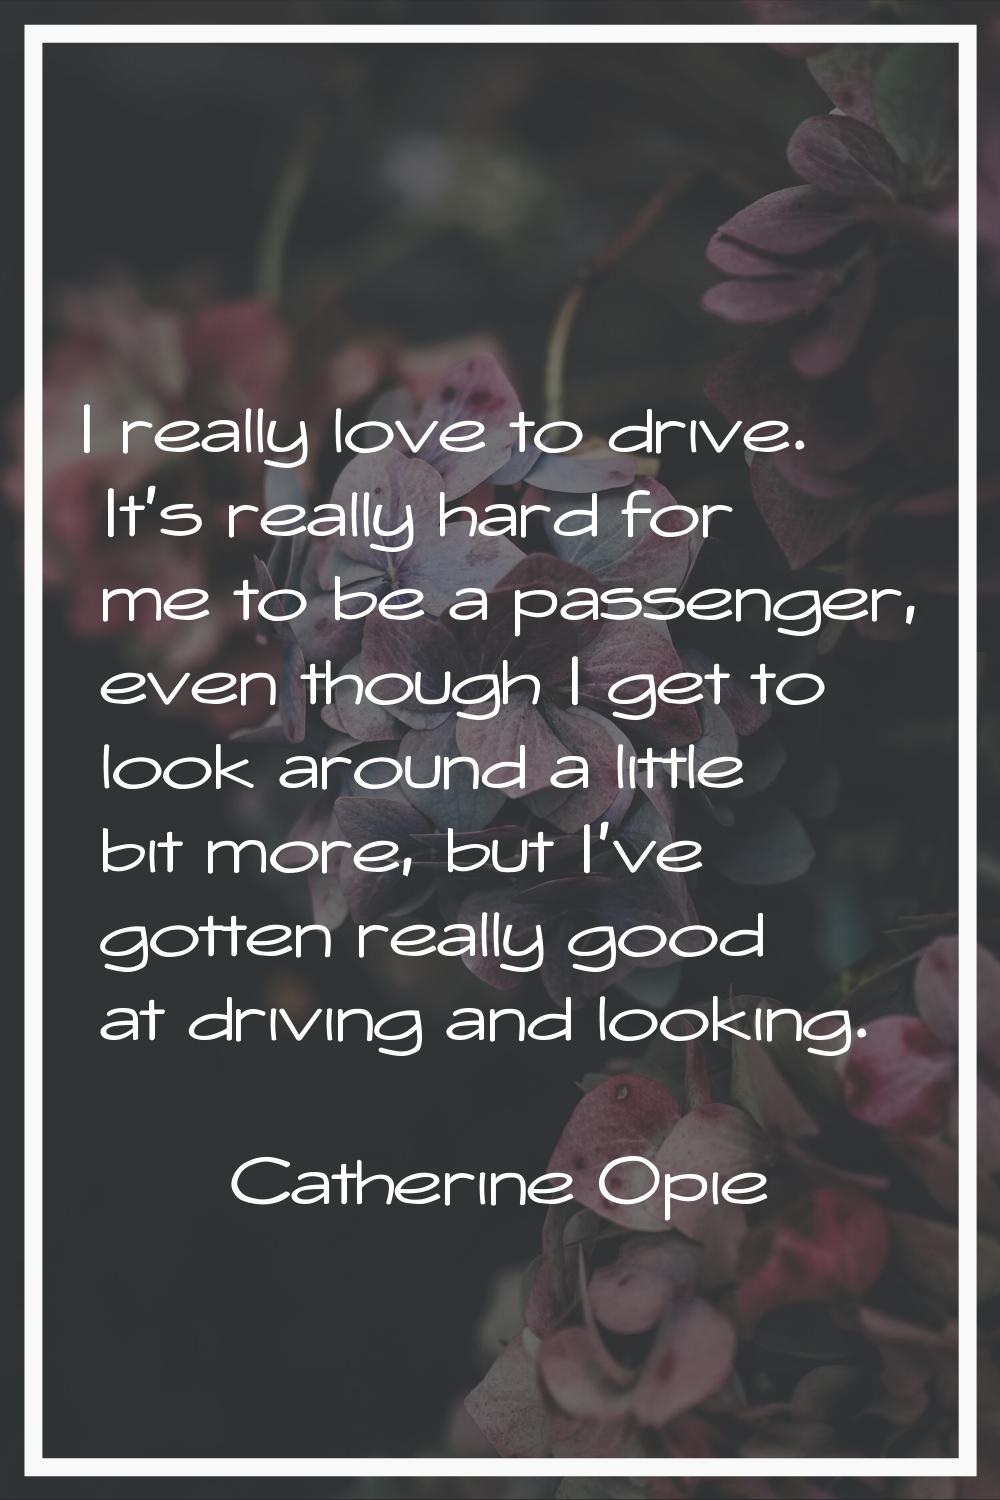 I really love to drive. It's really hard for me to be a passenger, even though I get to look around